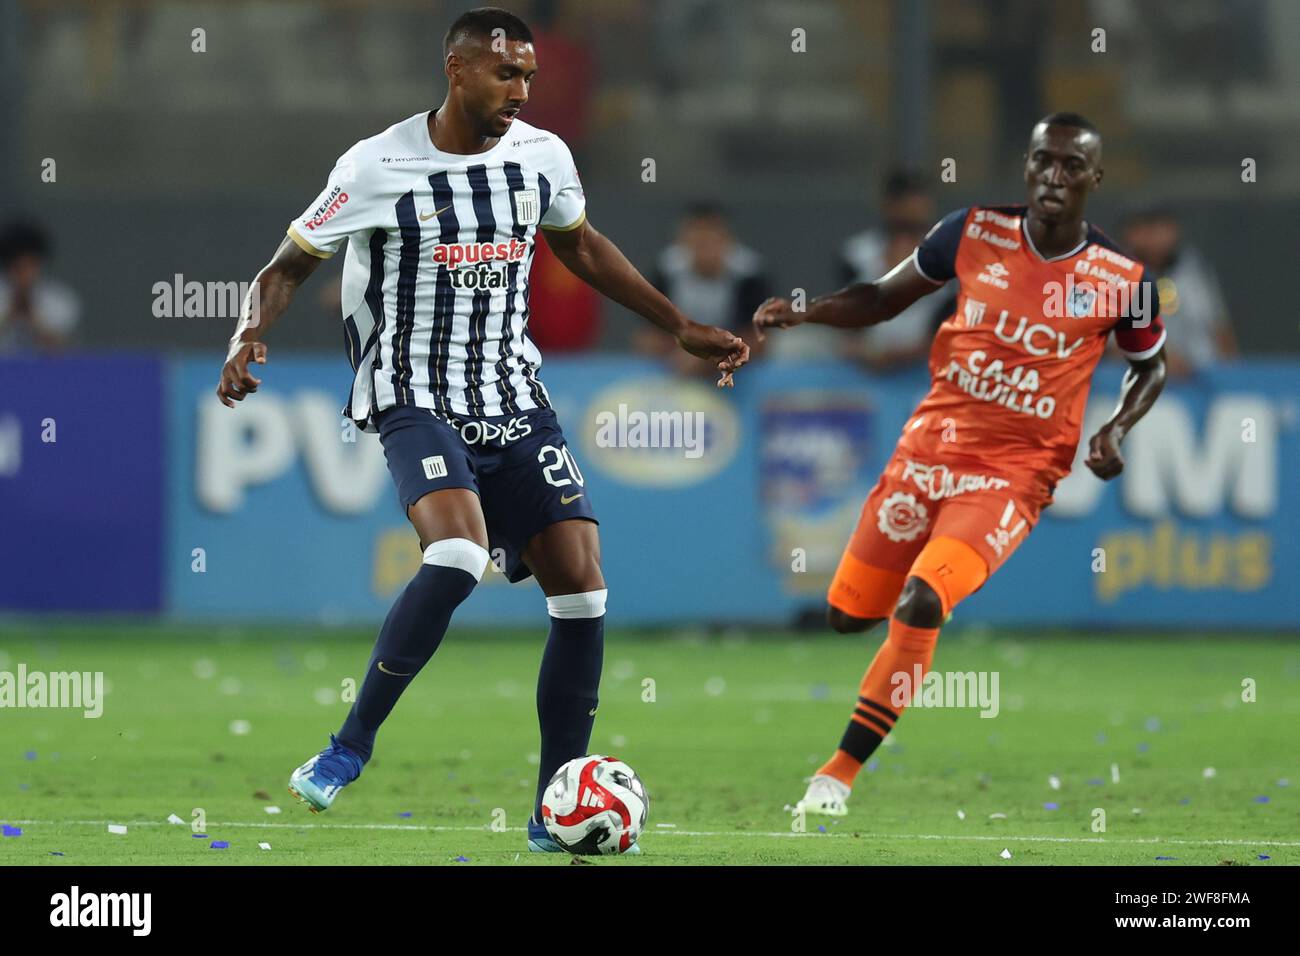 Aldair Fuentes of Alianza Lima during the Liga 1 match between Alianza de Lima and Cesar Vallejo played at Nacional Stadium on January 28, 2024 in Lima, Peru. (Photo by Miguel Marrufo / PRESSINPHOTO) Stock Photo